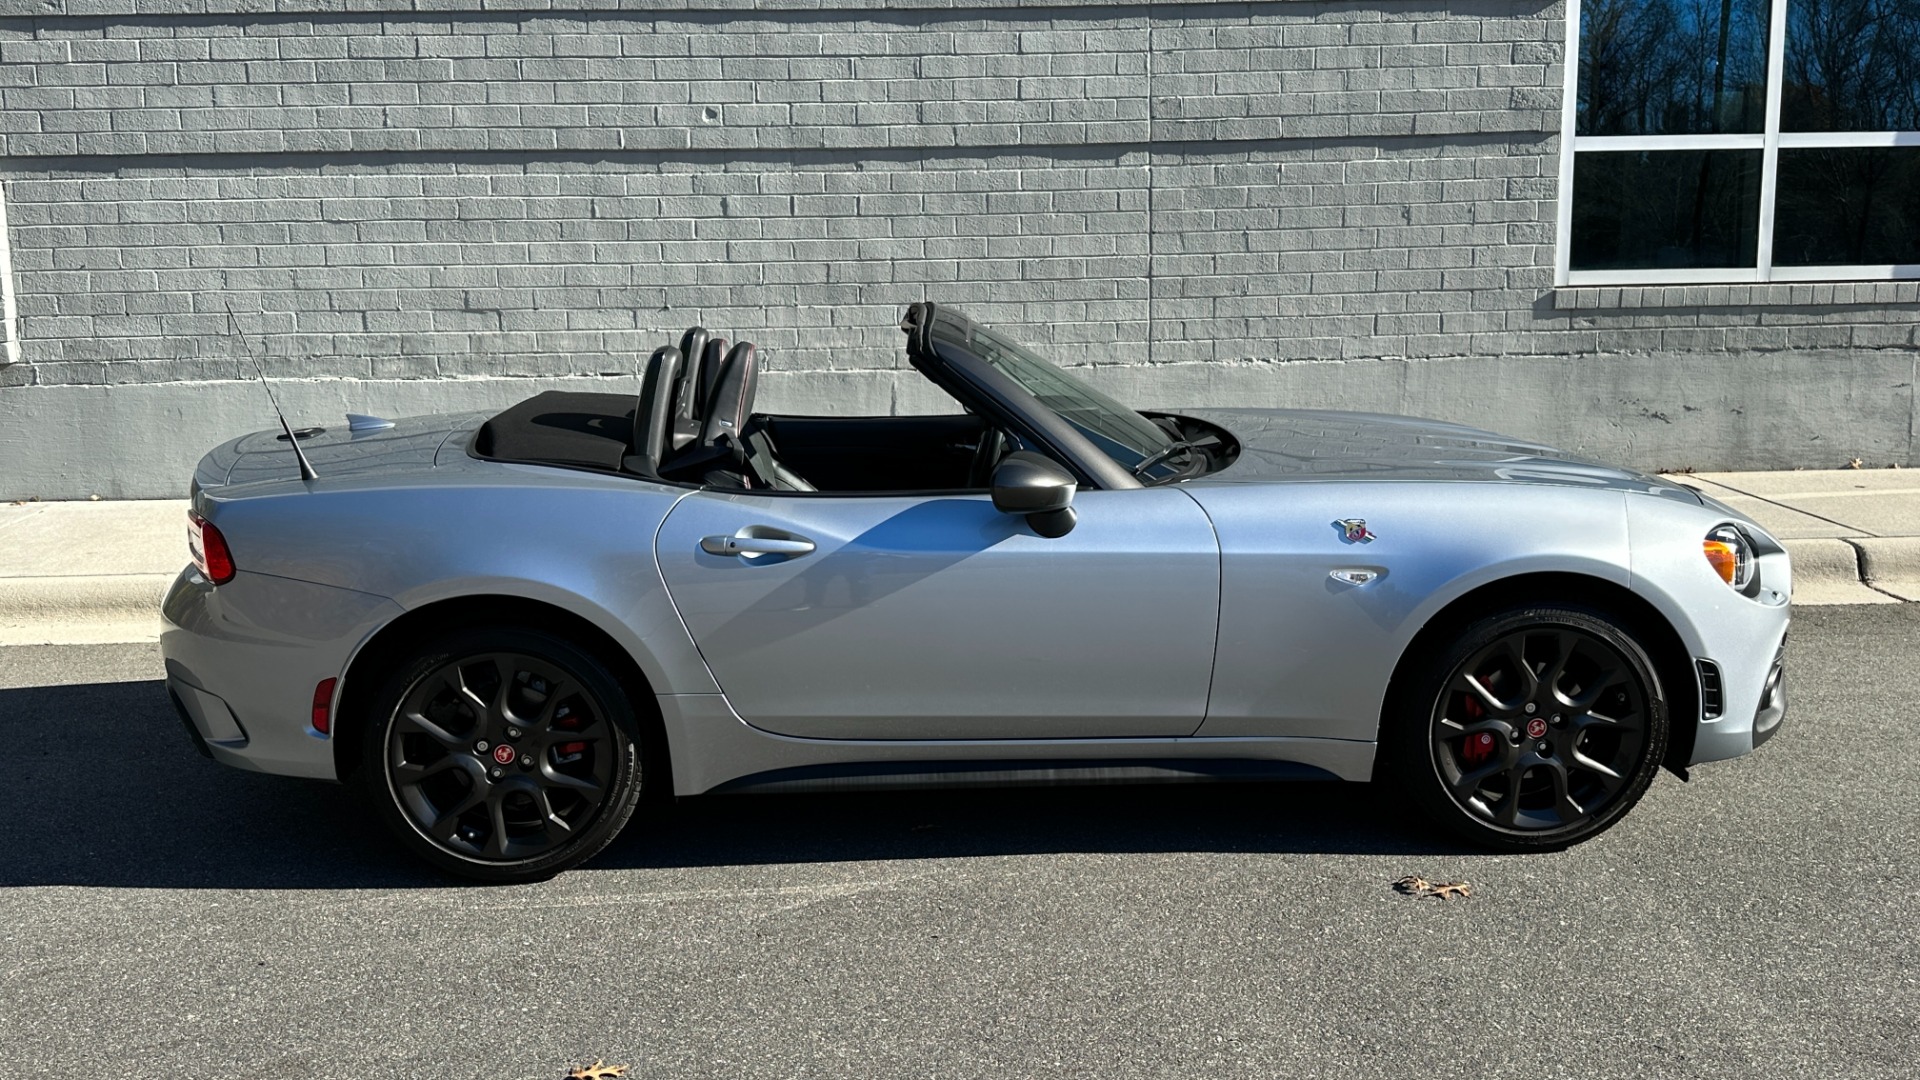 Used 2020 FIAT 124 Spider ARBARTH / MONZA EXHAUST / RECARO SPORT SEATS / BREMBO BRAKES / 6 SPEED for sale $29,995 at Formula Imports in Charlotte NC 28227 3